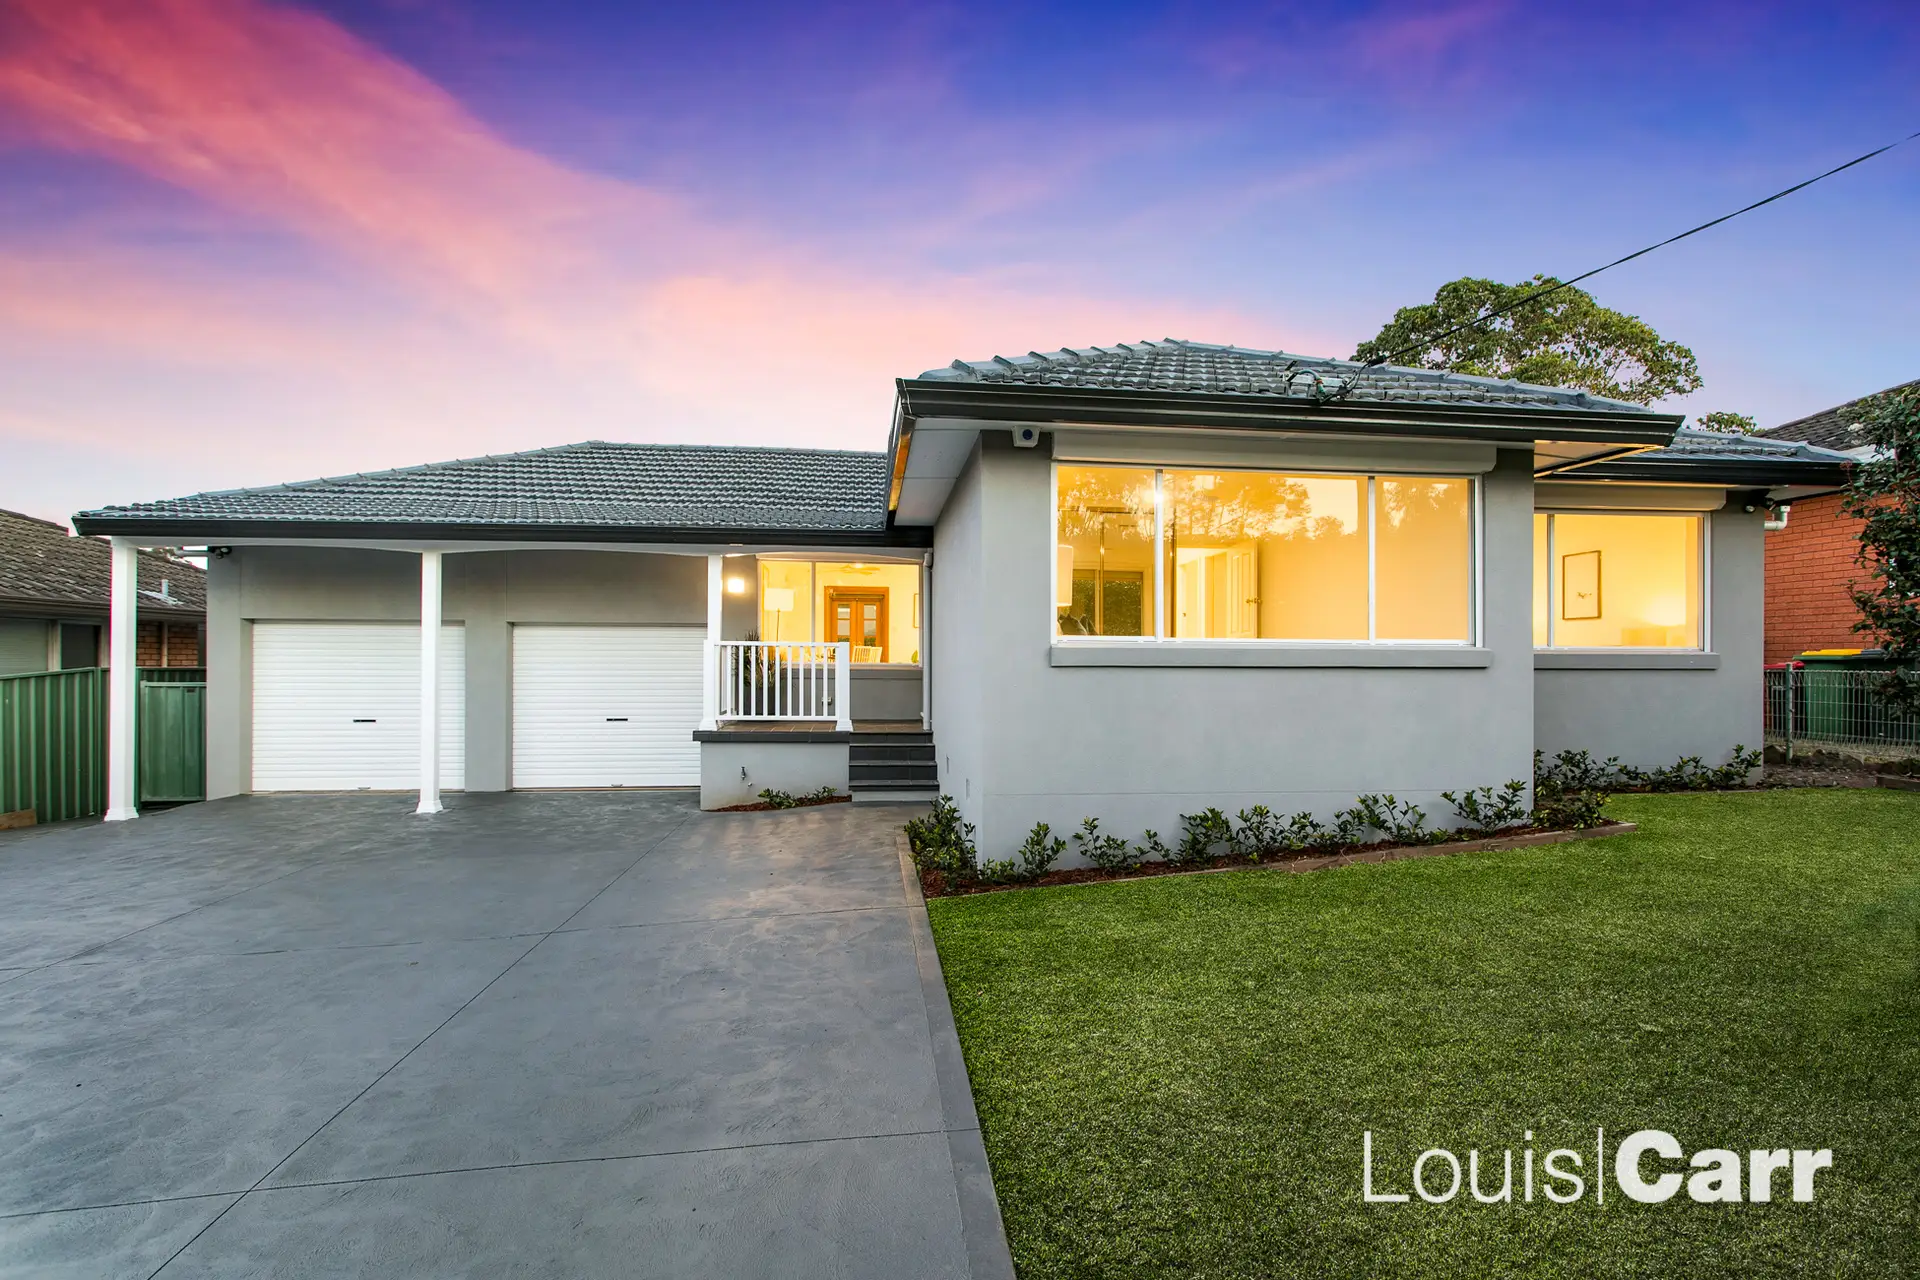 Photo #1: 110 Junction Road, Winston Hills - Sold by Louis Carr Real Estate